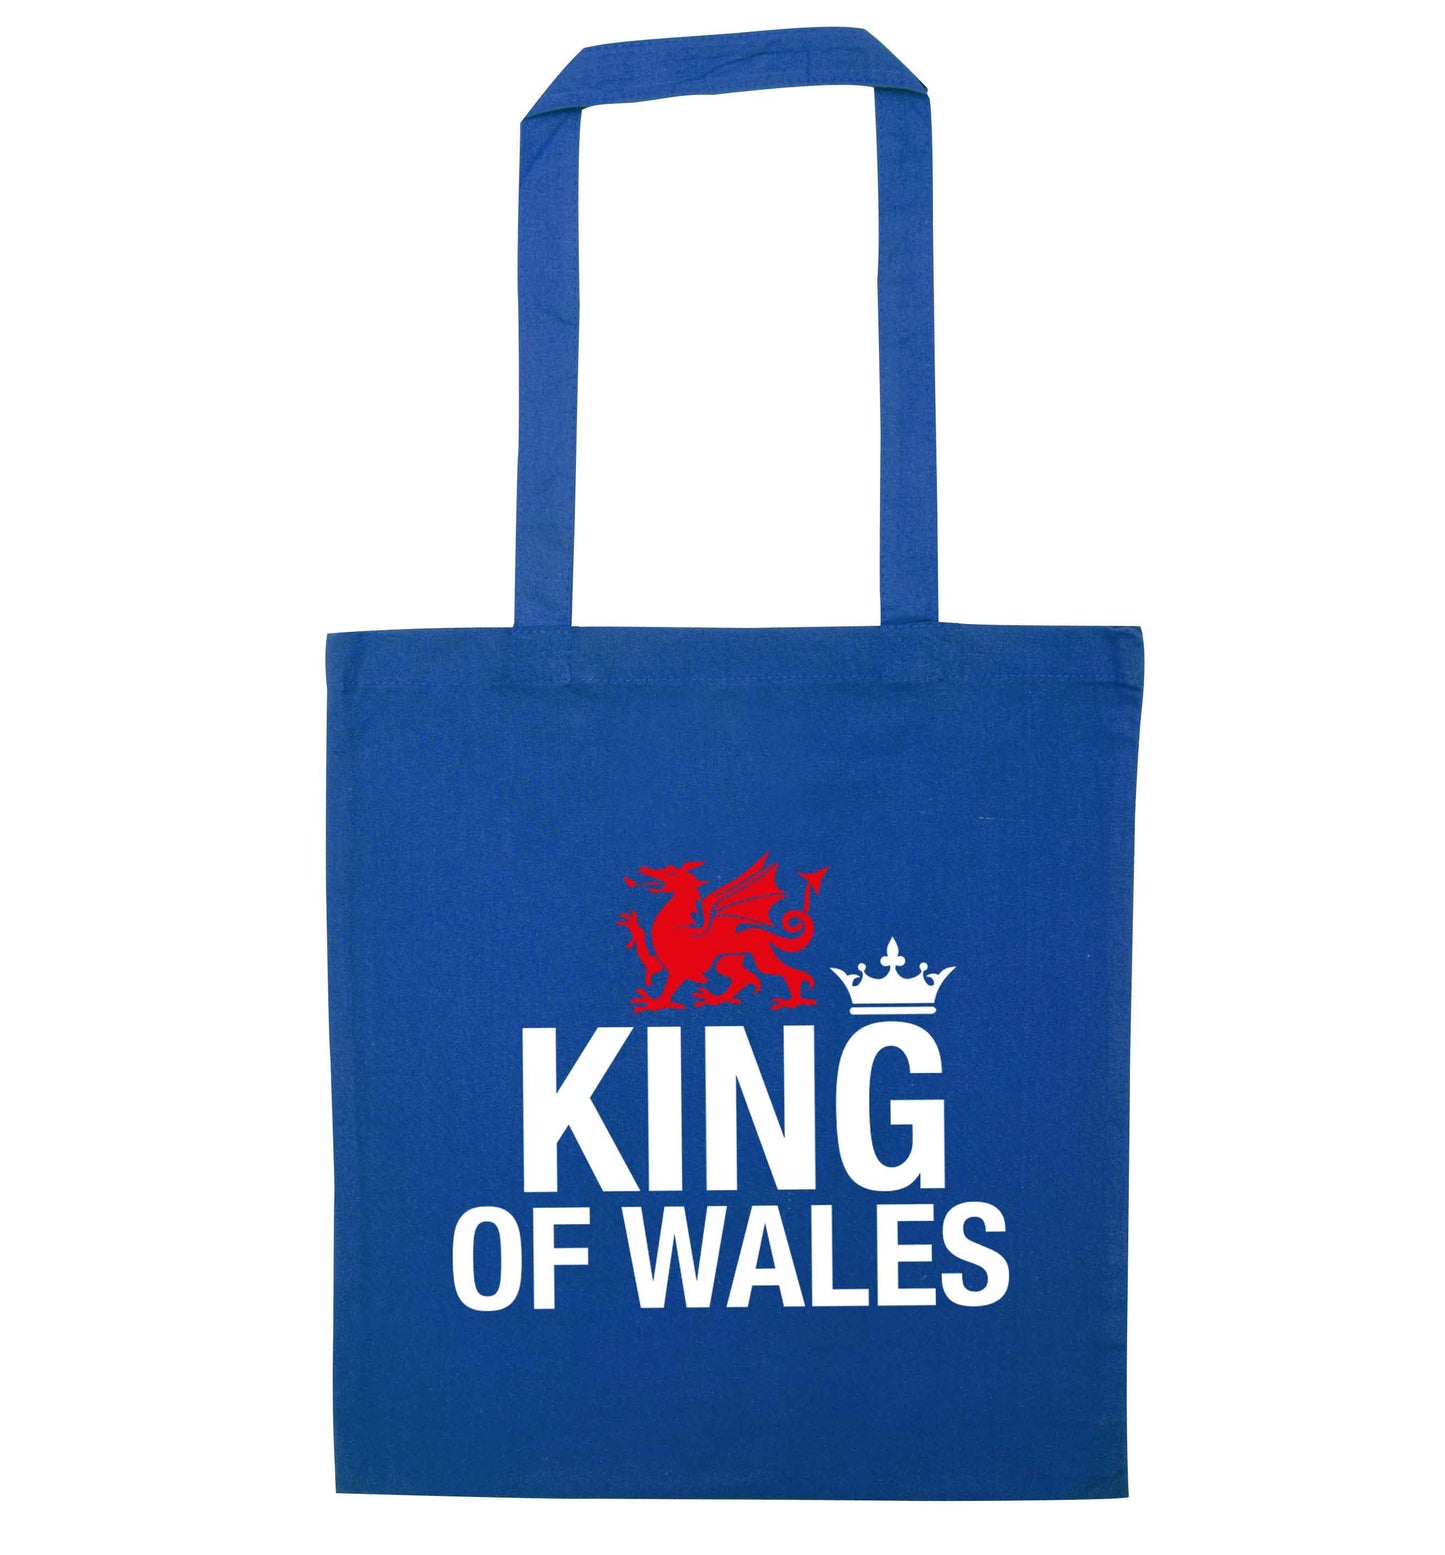 King of Wales blue tote bag